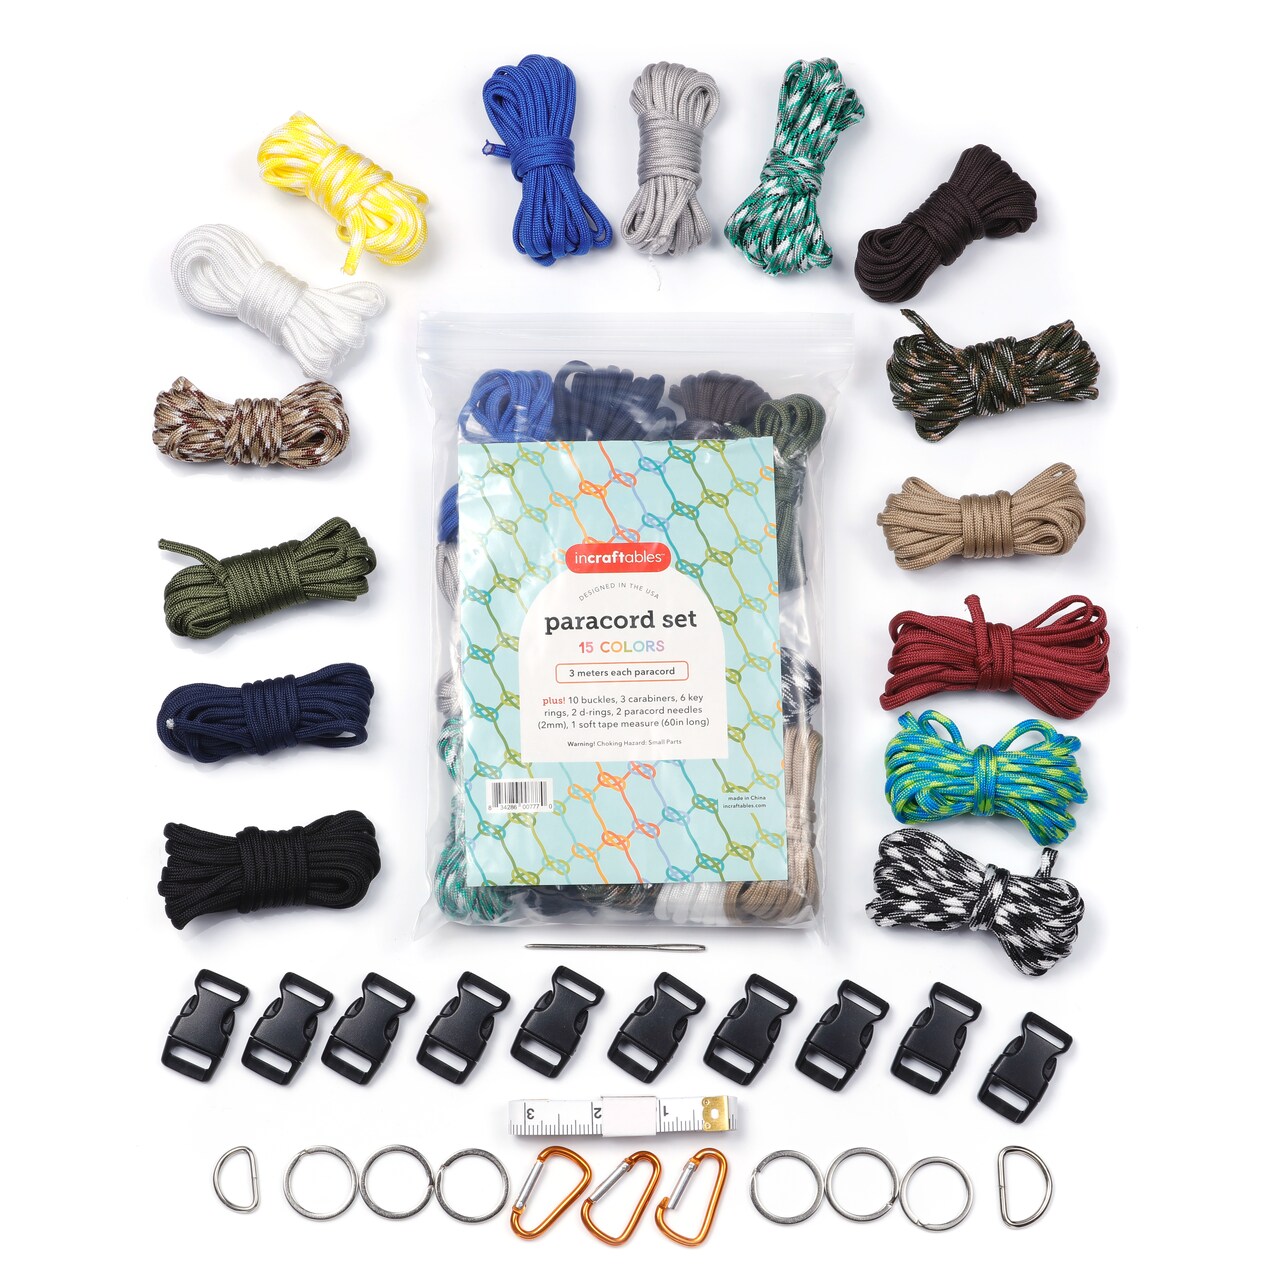 Incraftables Paracord kit with 15 Colors Paracord Rope (2mm), Buckle, Keyring, Carabiner &#x26; More. Best Paracord Bracelet Making Set for Lanyards, Dog Collars, Parachute Cord &#x26; Survival Rope